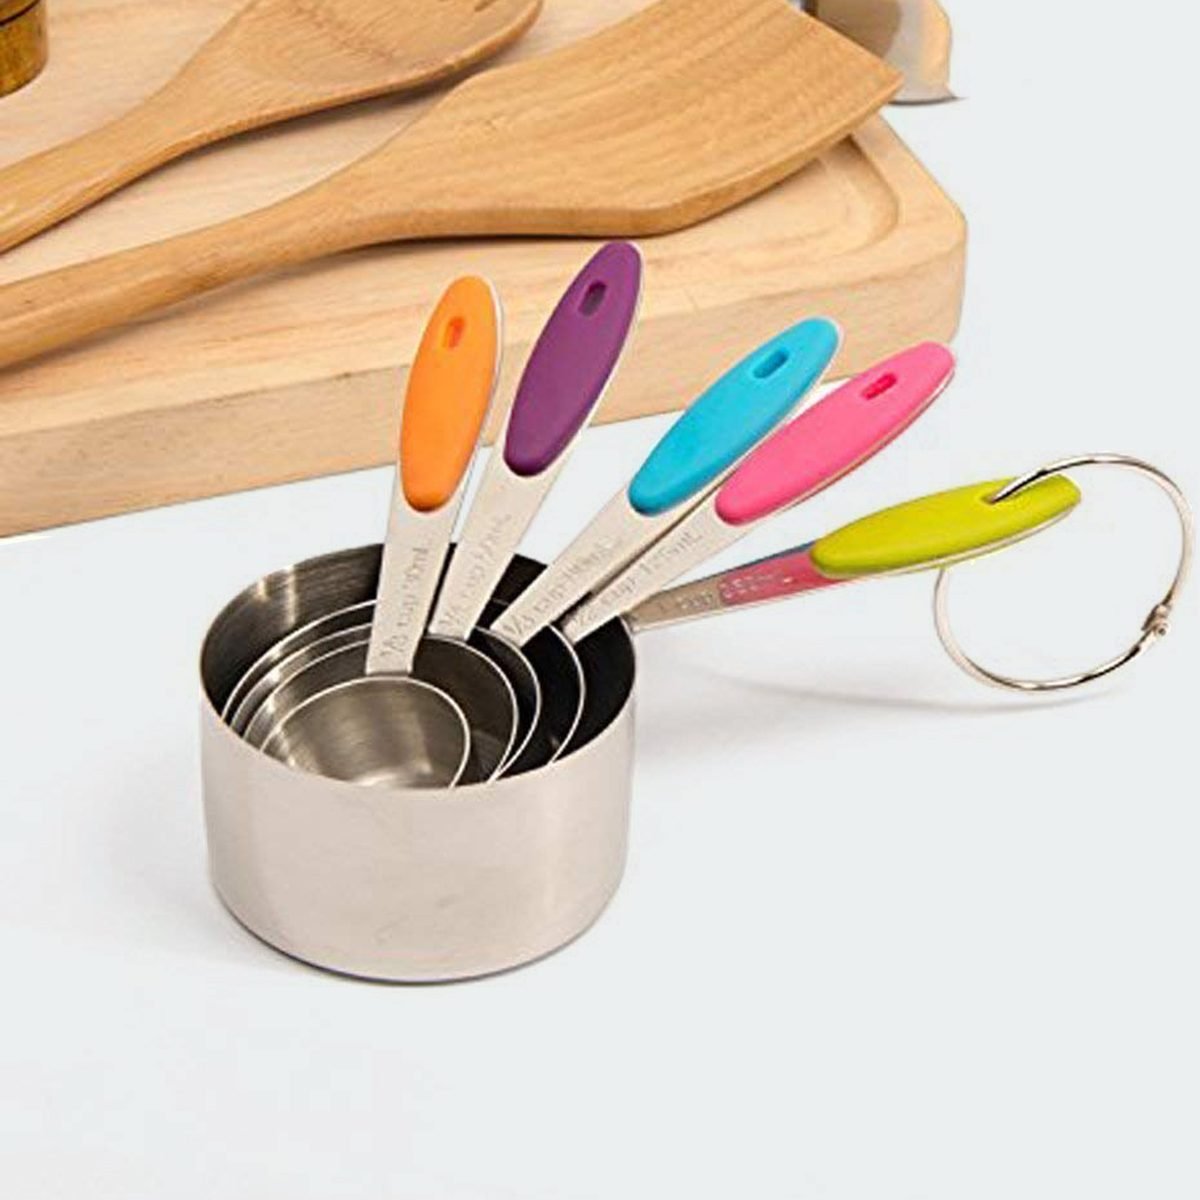  Stainless Steel Measuring Cups and Spoons Set - Metal Cup and Spoon  Set to Measure Dry Food - Silicone Handles - Great for Cooking and Baking  in the Kitchen - 10